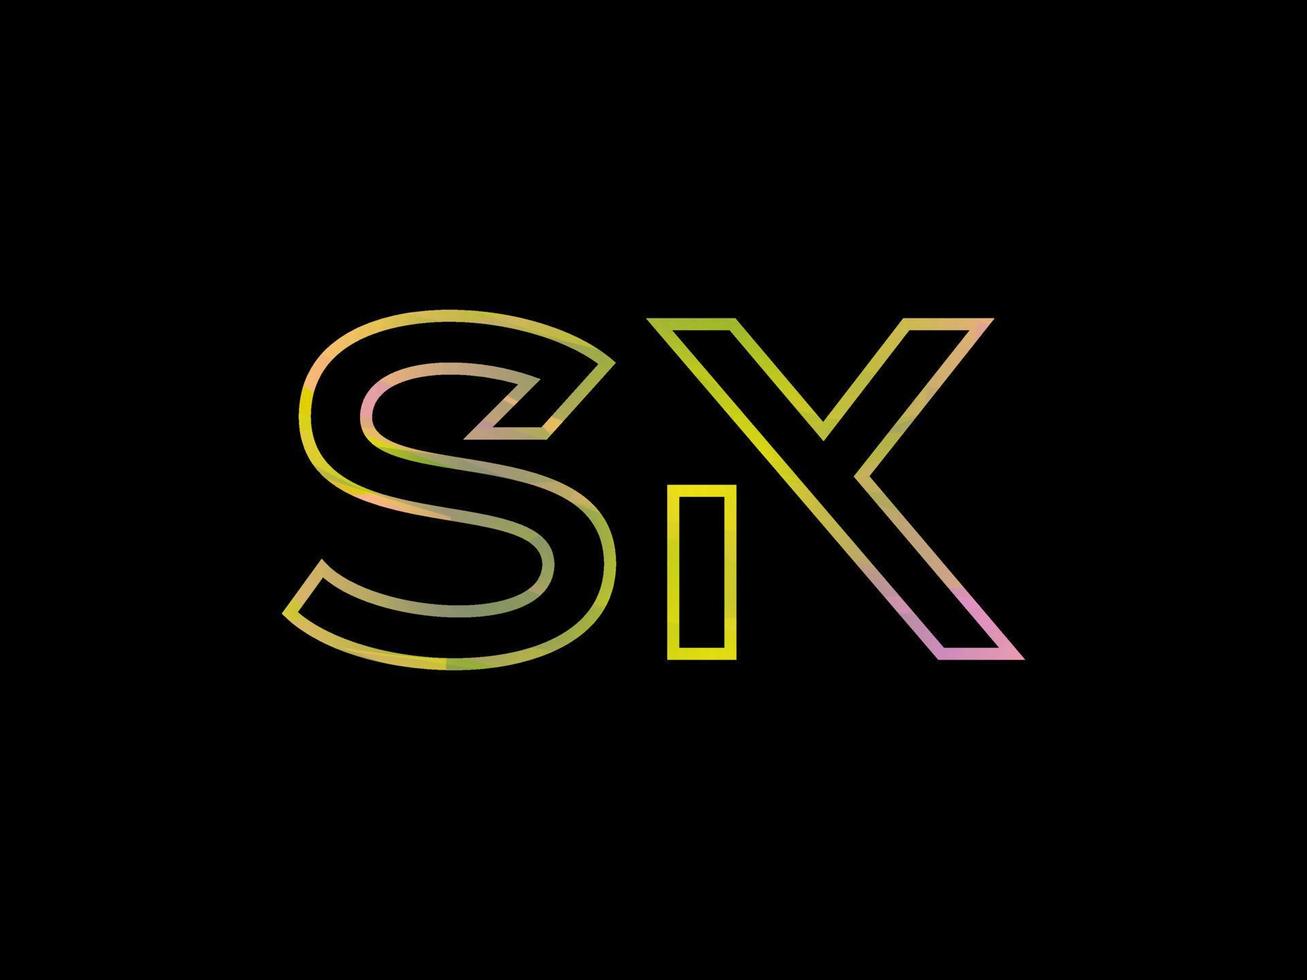 SK Letter Logo With Colorful Rainbow Texture Vector. Pro vector. vector